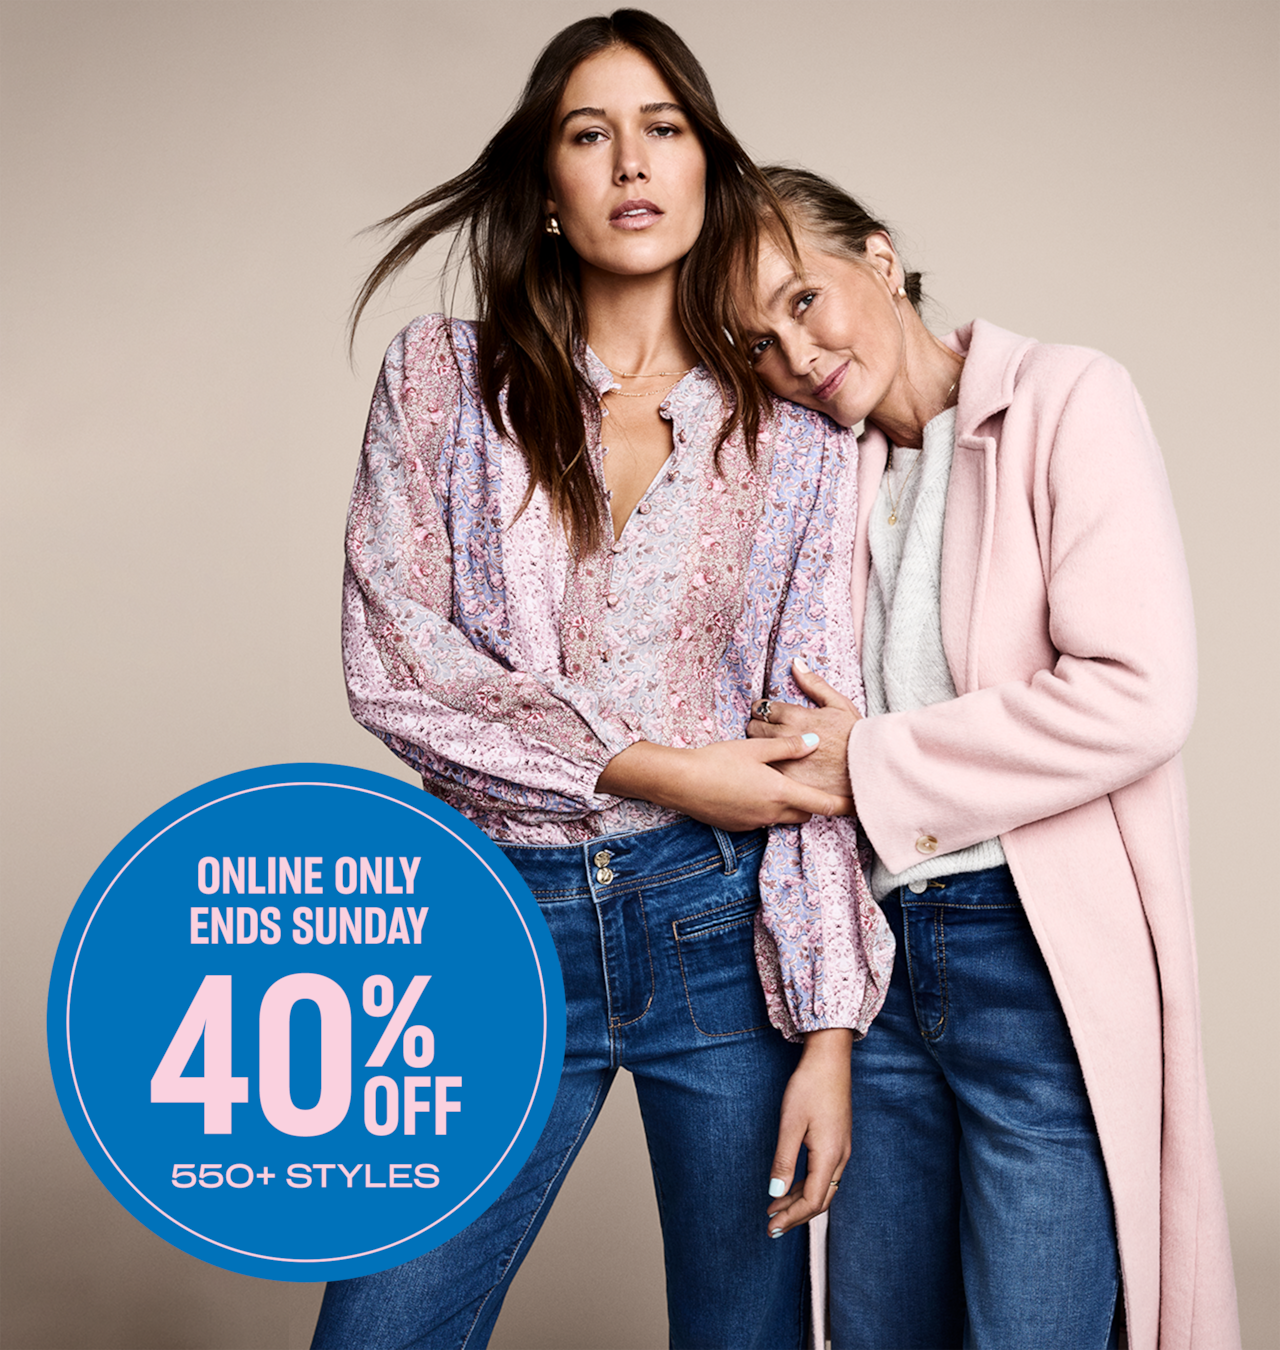 Online Only. Ends Sunday. 40% Off Selected Styles.